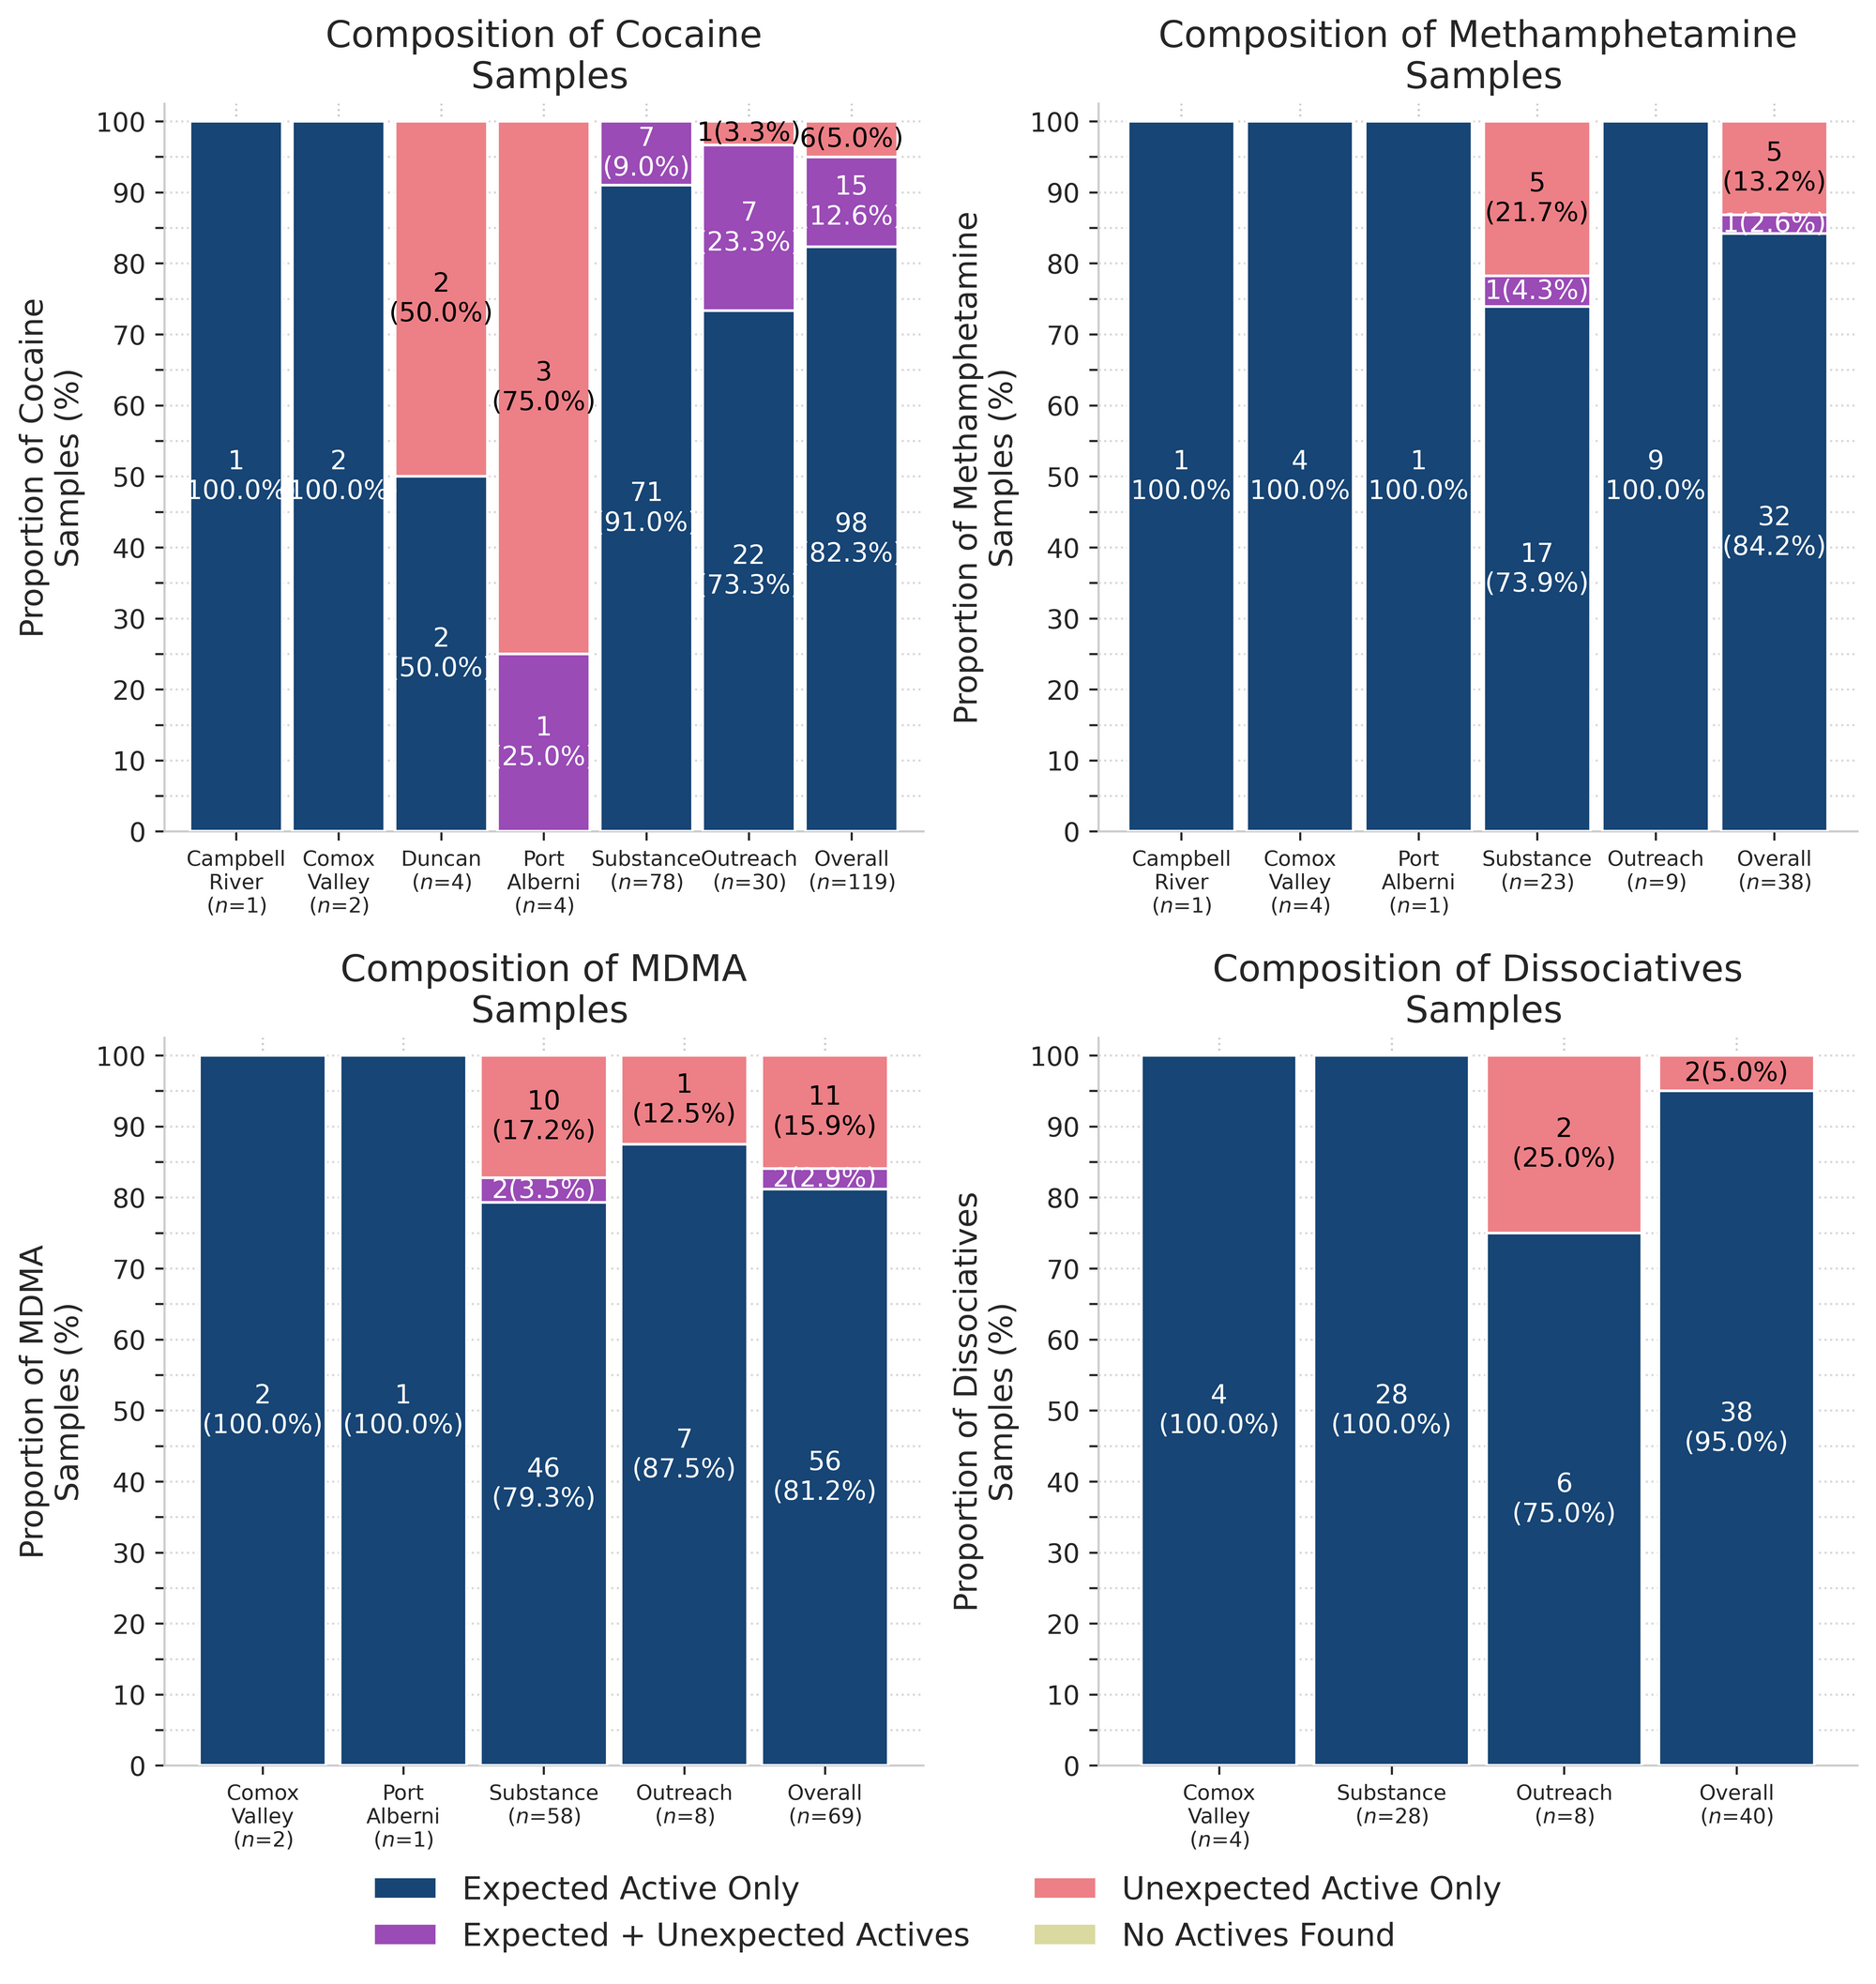 Figure 2.Compositional breakdown by drug class and sample collection location/method. Bars are stacked by the percentage of samples in each category, with the individual sample counts (and relative proportions) overlaid. "Dark Blue" regions group samples that were simply as expected with no other notable compounds detected, "Magenta" shows samples that contained the expected drug and contained an unexpected active, "Salmon" groups samples that only contained an unexpected active (the expected drug was not found), and "Pear yellow" displays samples where no active compounds were detected.